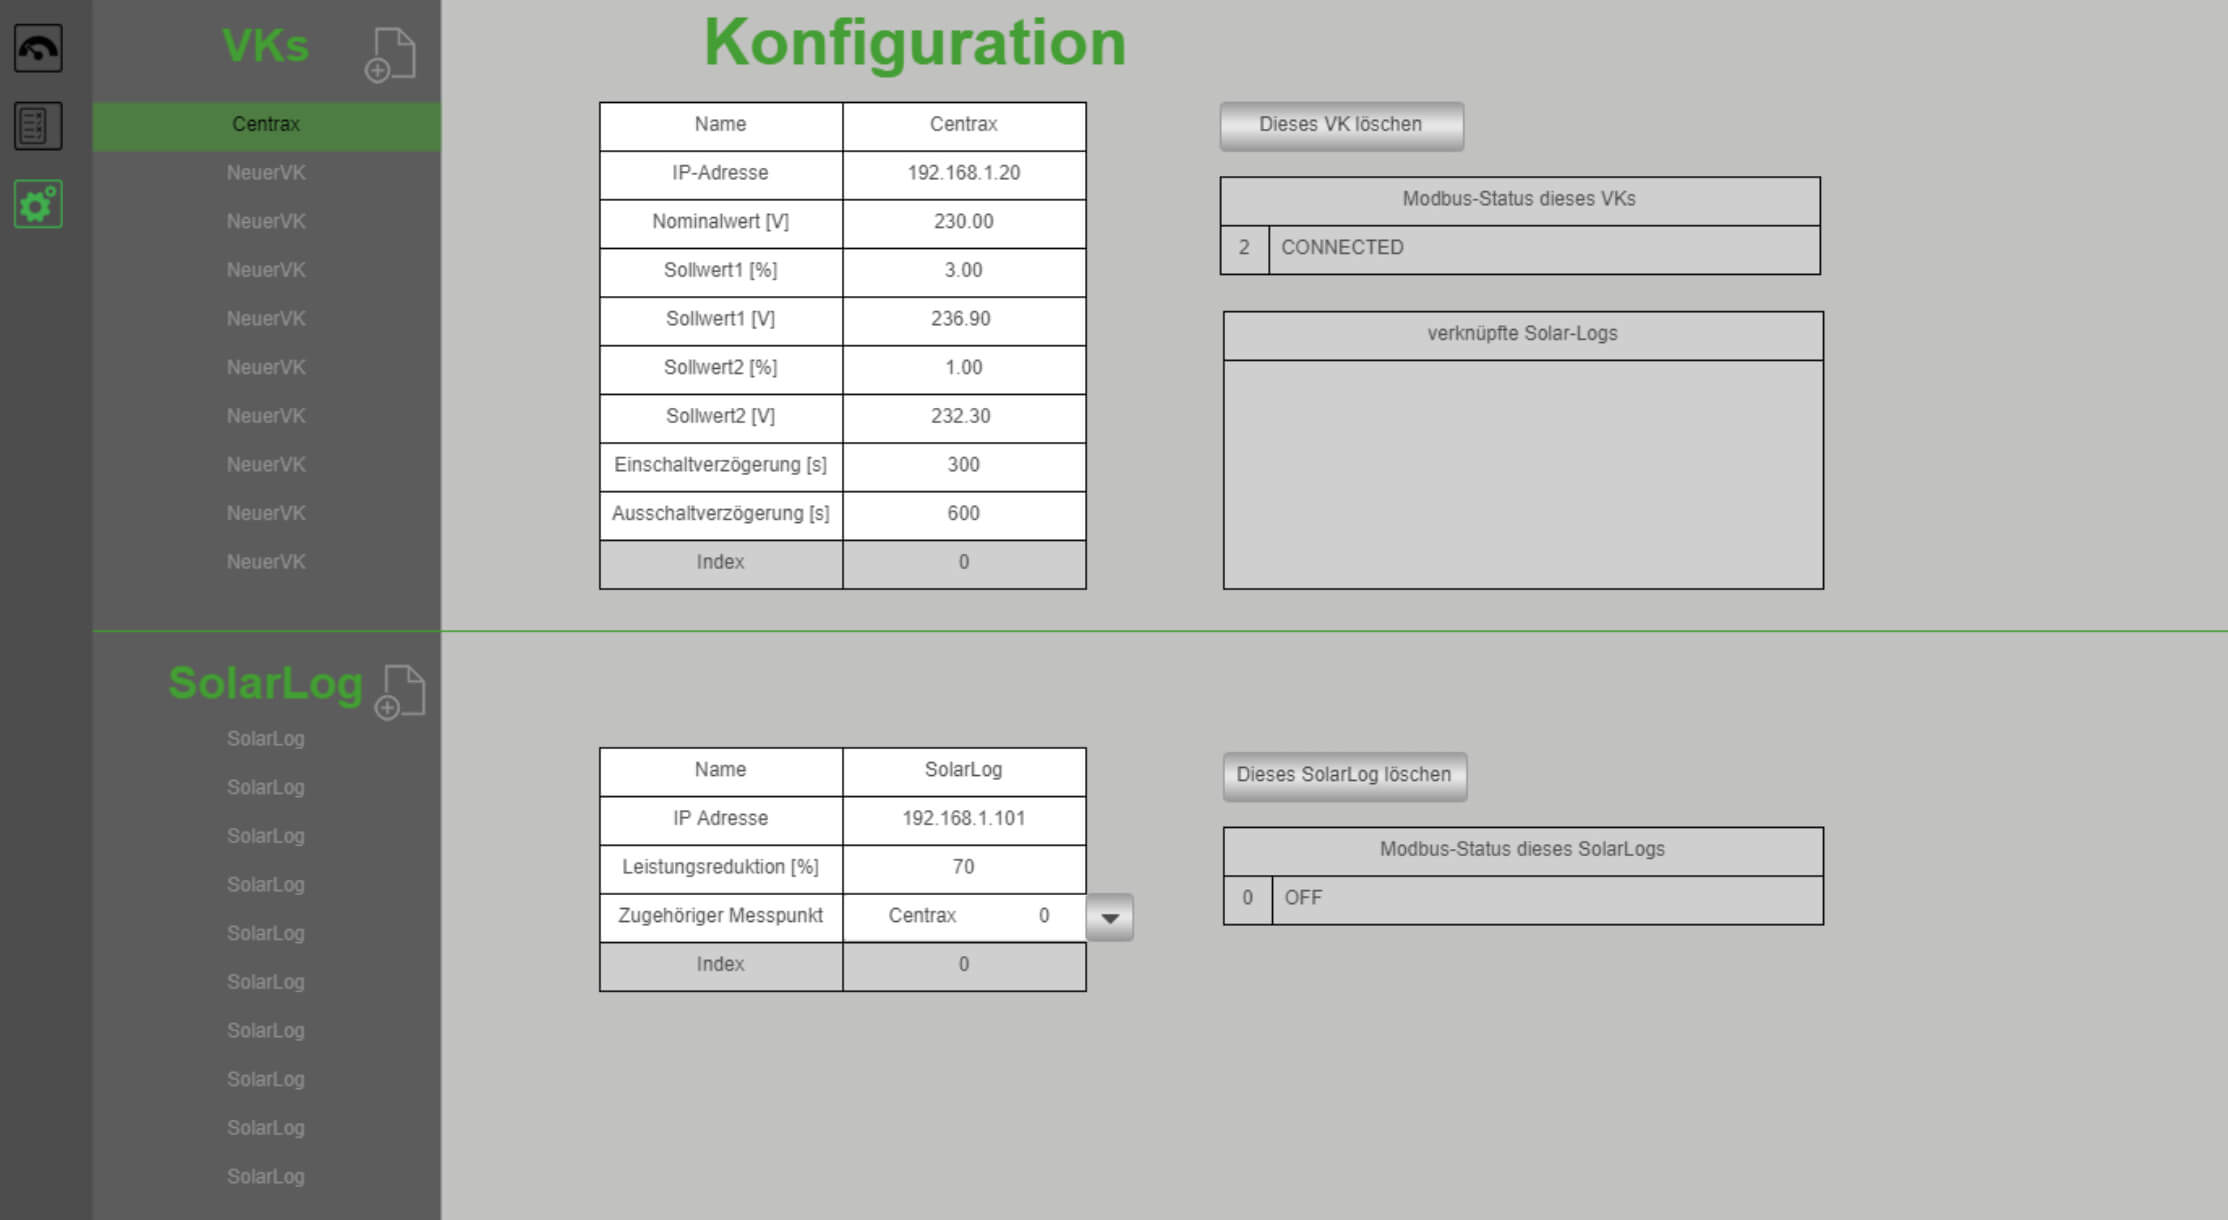 Configuration from the application